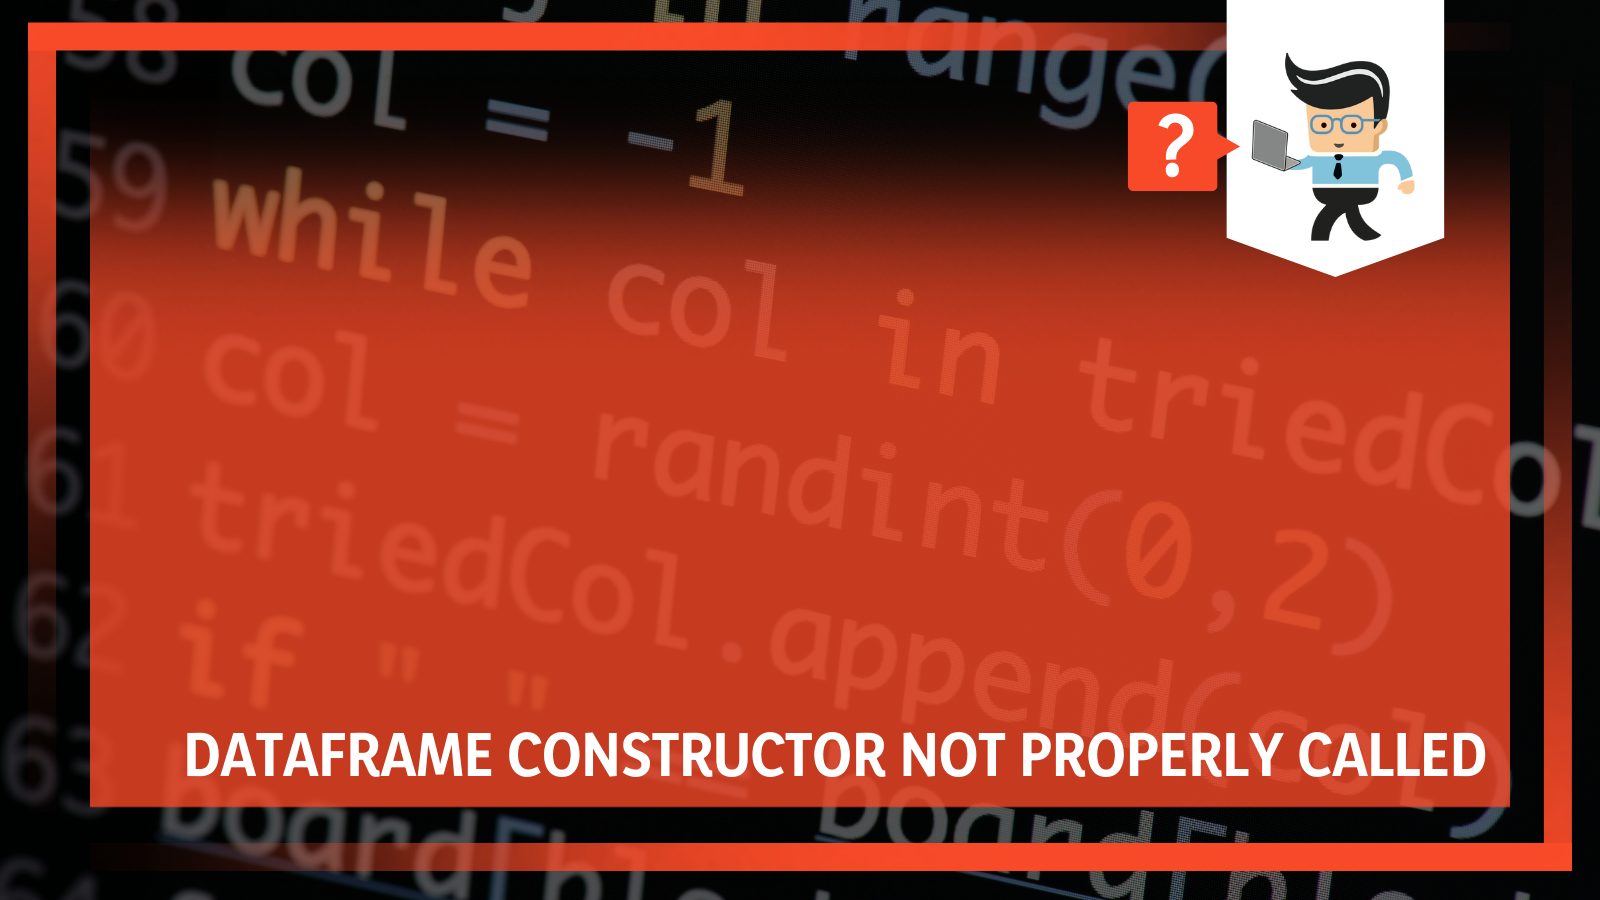 How to fix dataframe constructor not properly called error